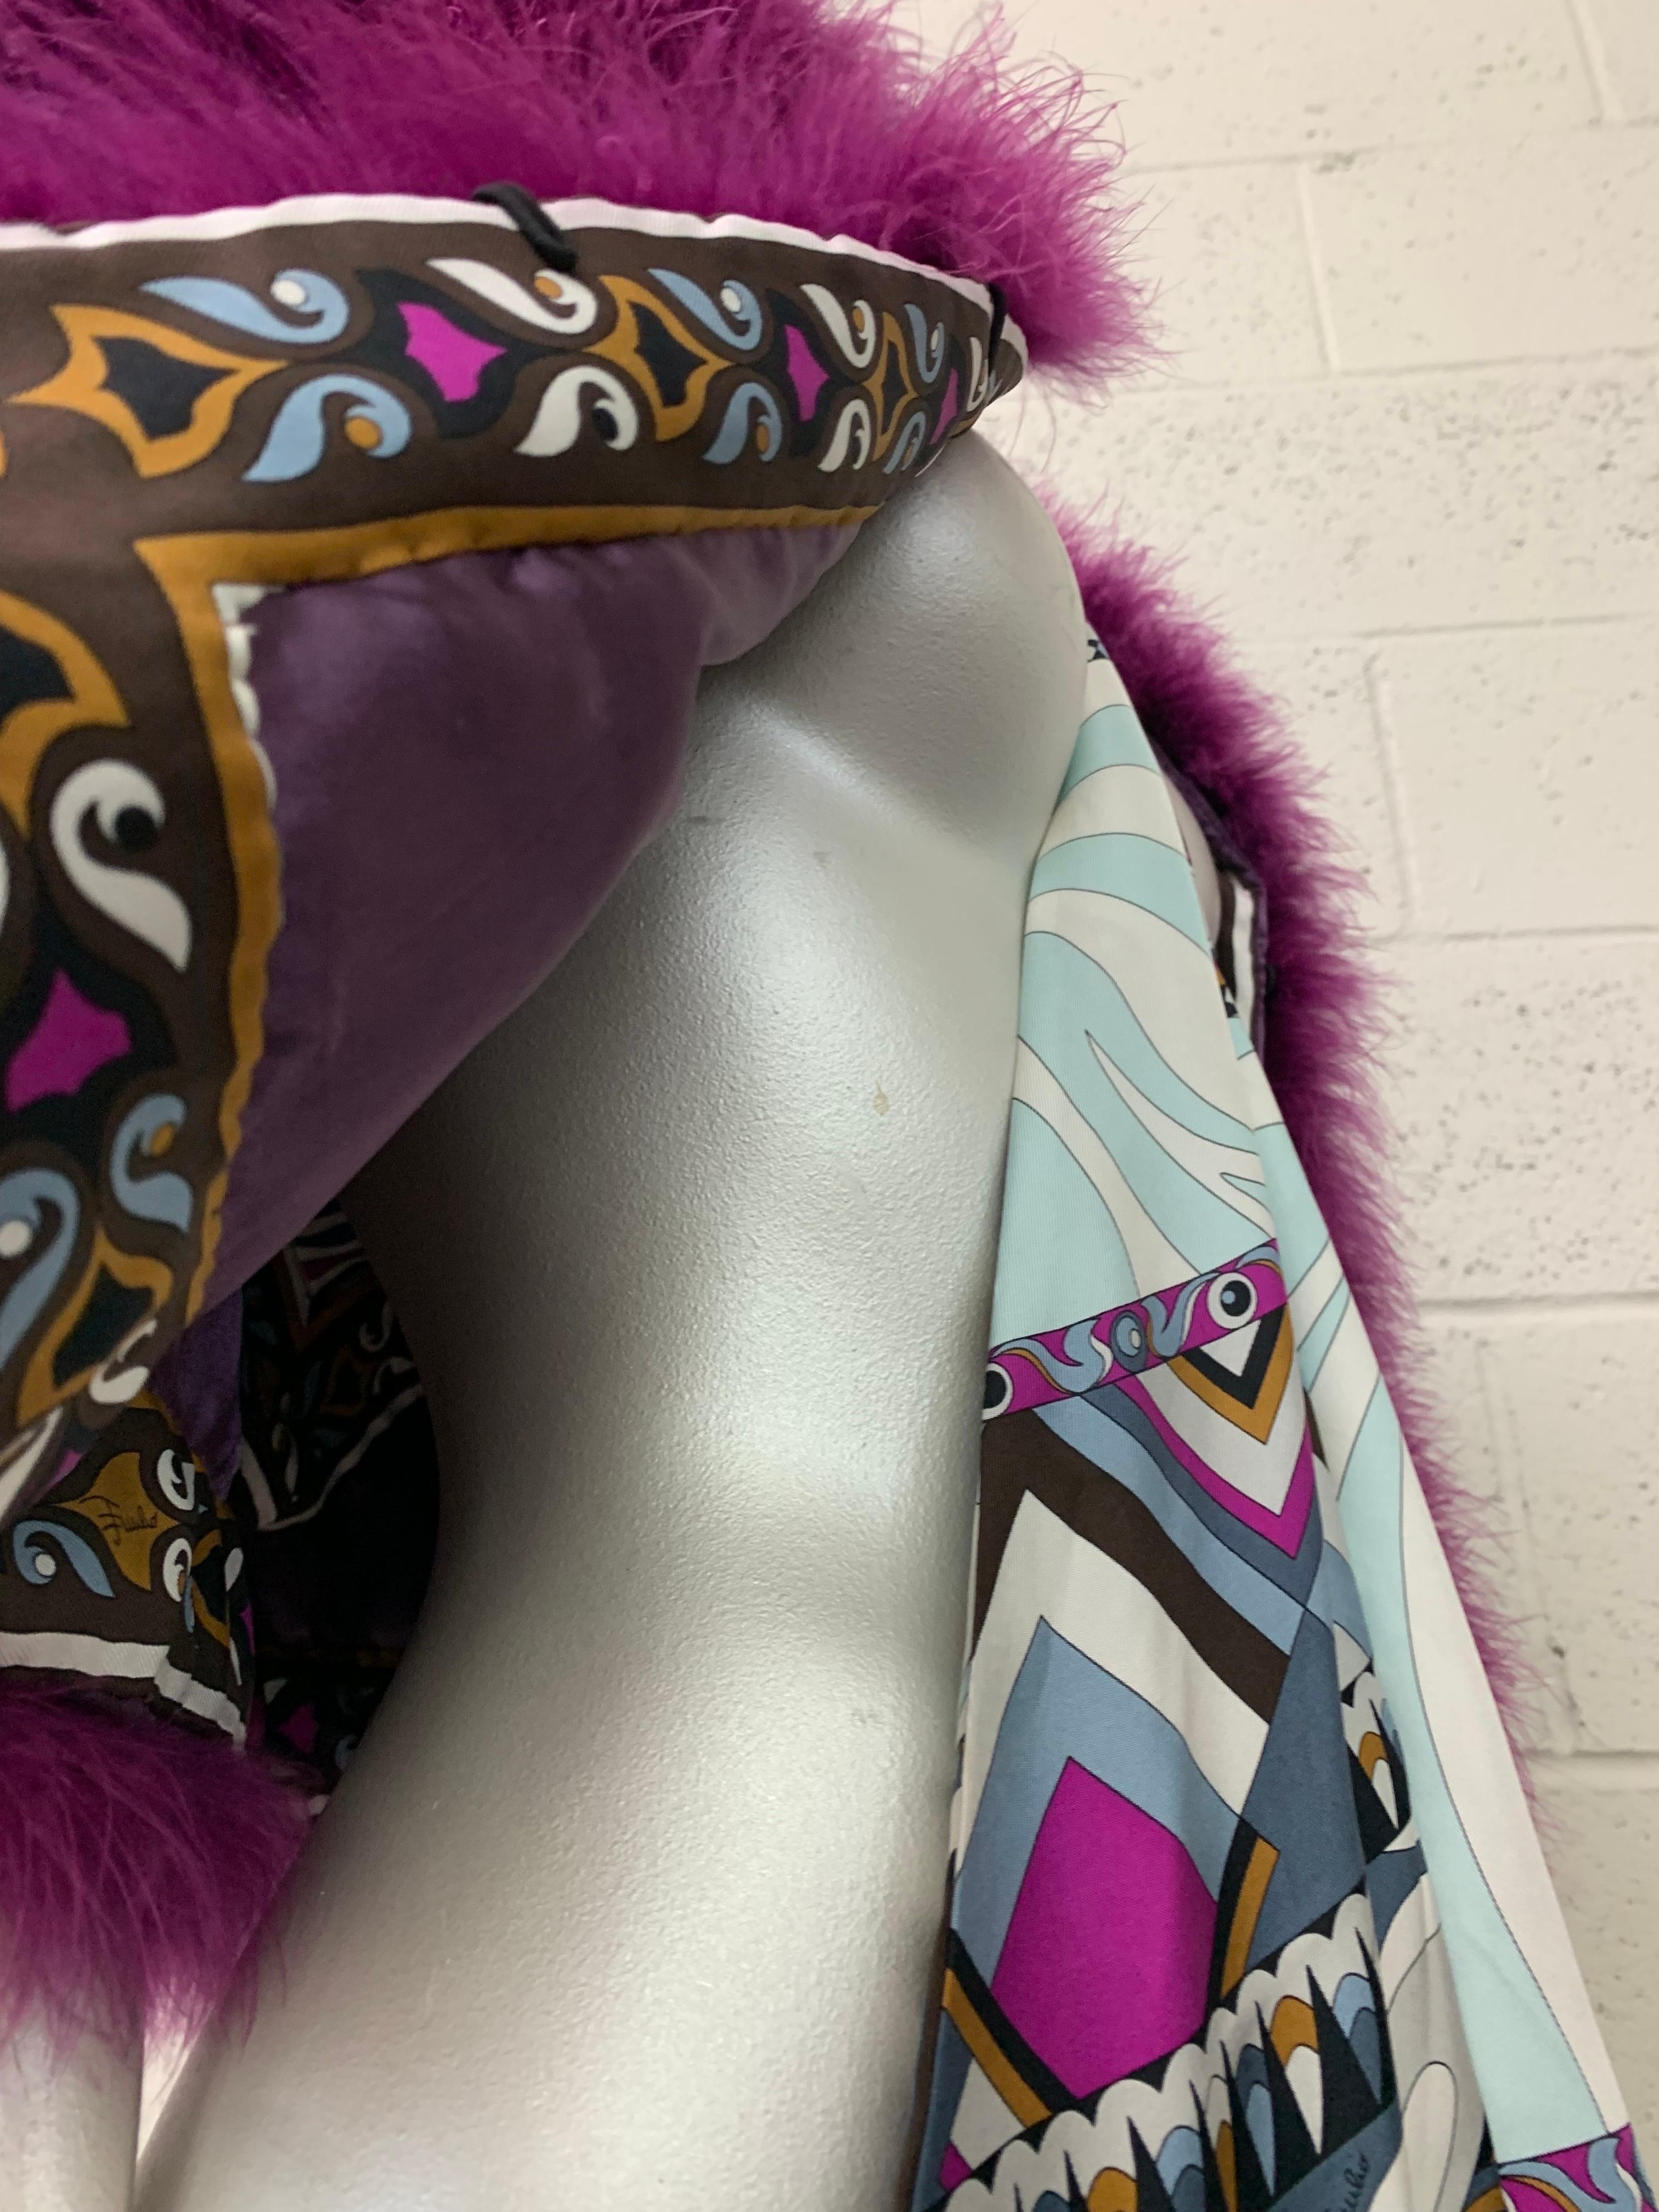 Torso Creations Magenta Marabou Chubby Jacket w Pucci Scarf Tie at Neckline In Excellent Condition For Sale In Gresham, OR